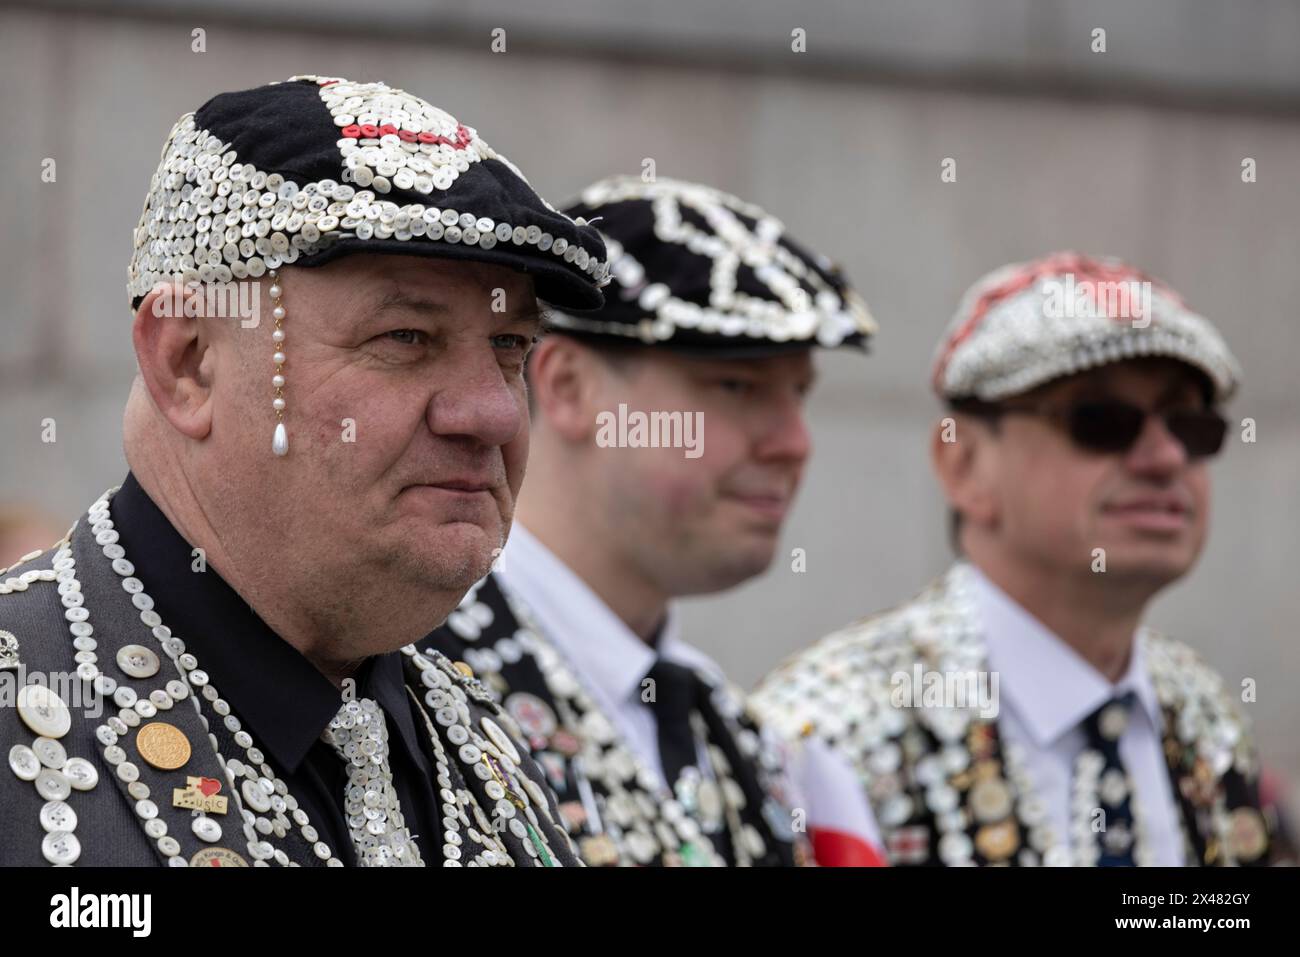 The Feast of St. George Festival in Trafalgar Square, April 23rd 2024 including Pearly Kings and Queens to celebrate celebrate Patron Saint of England. Stock Photo